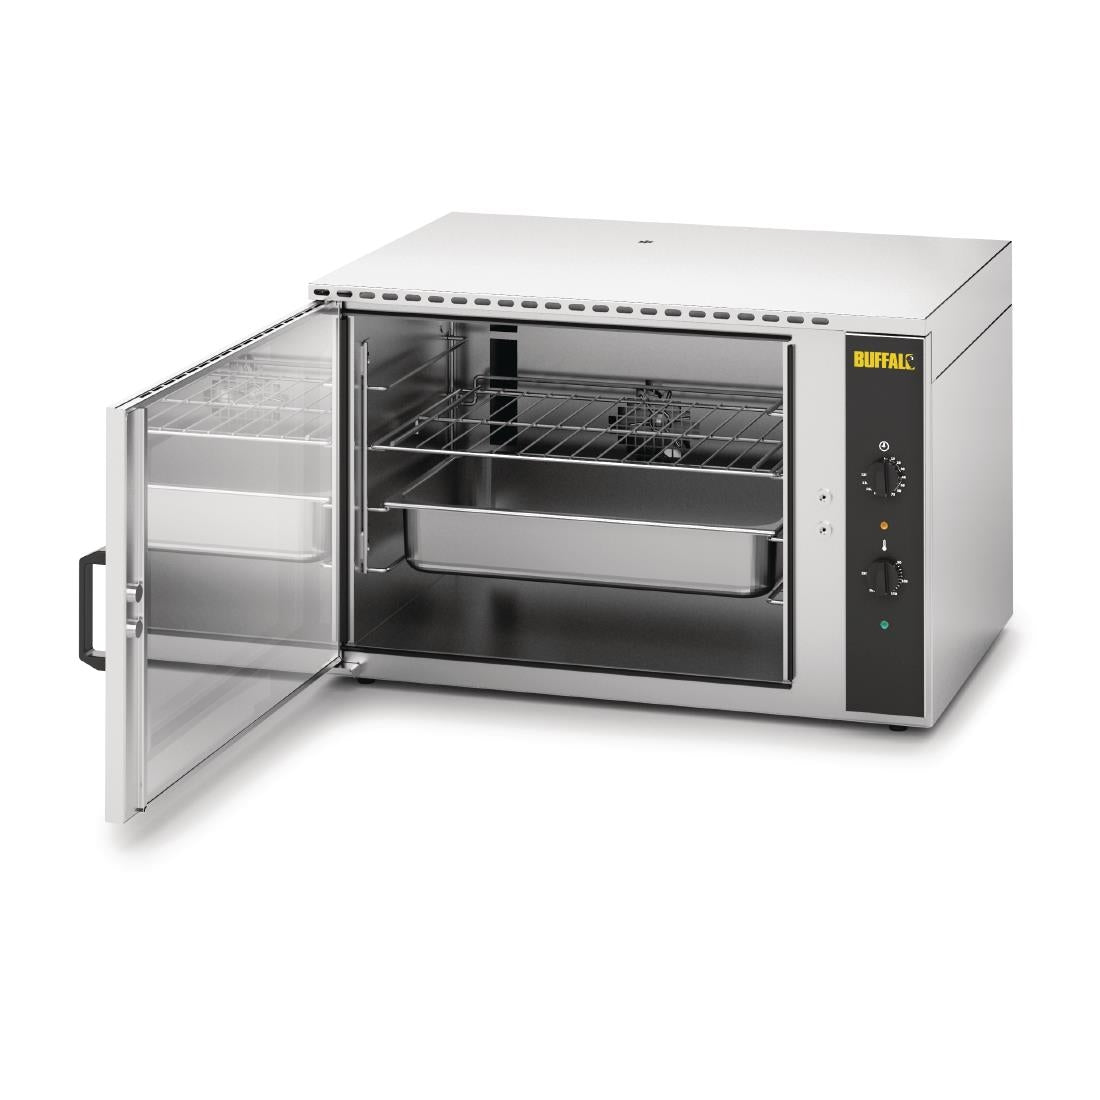 CW864 Buffalo Convection Oven 100Ltr JD Catering Equipment Solutions Ltd